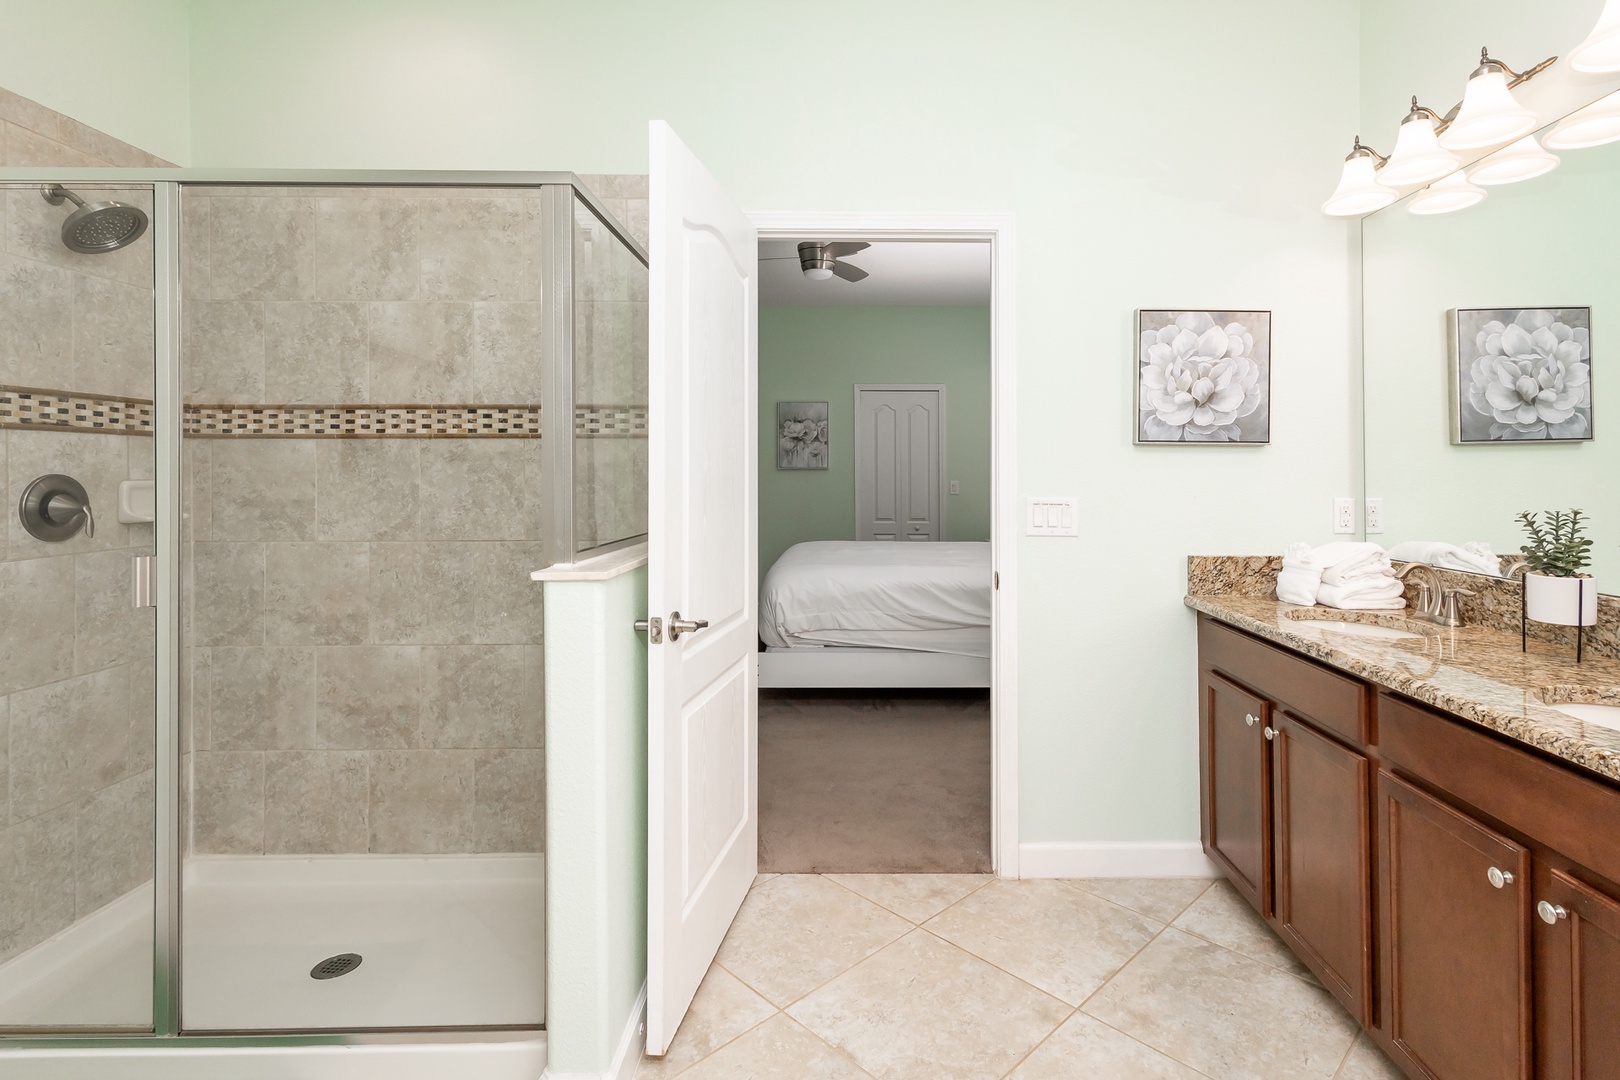 Private ensuite bathroom with dual sinks, separate shower, and soaking tub